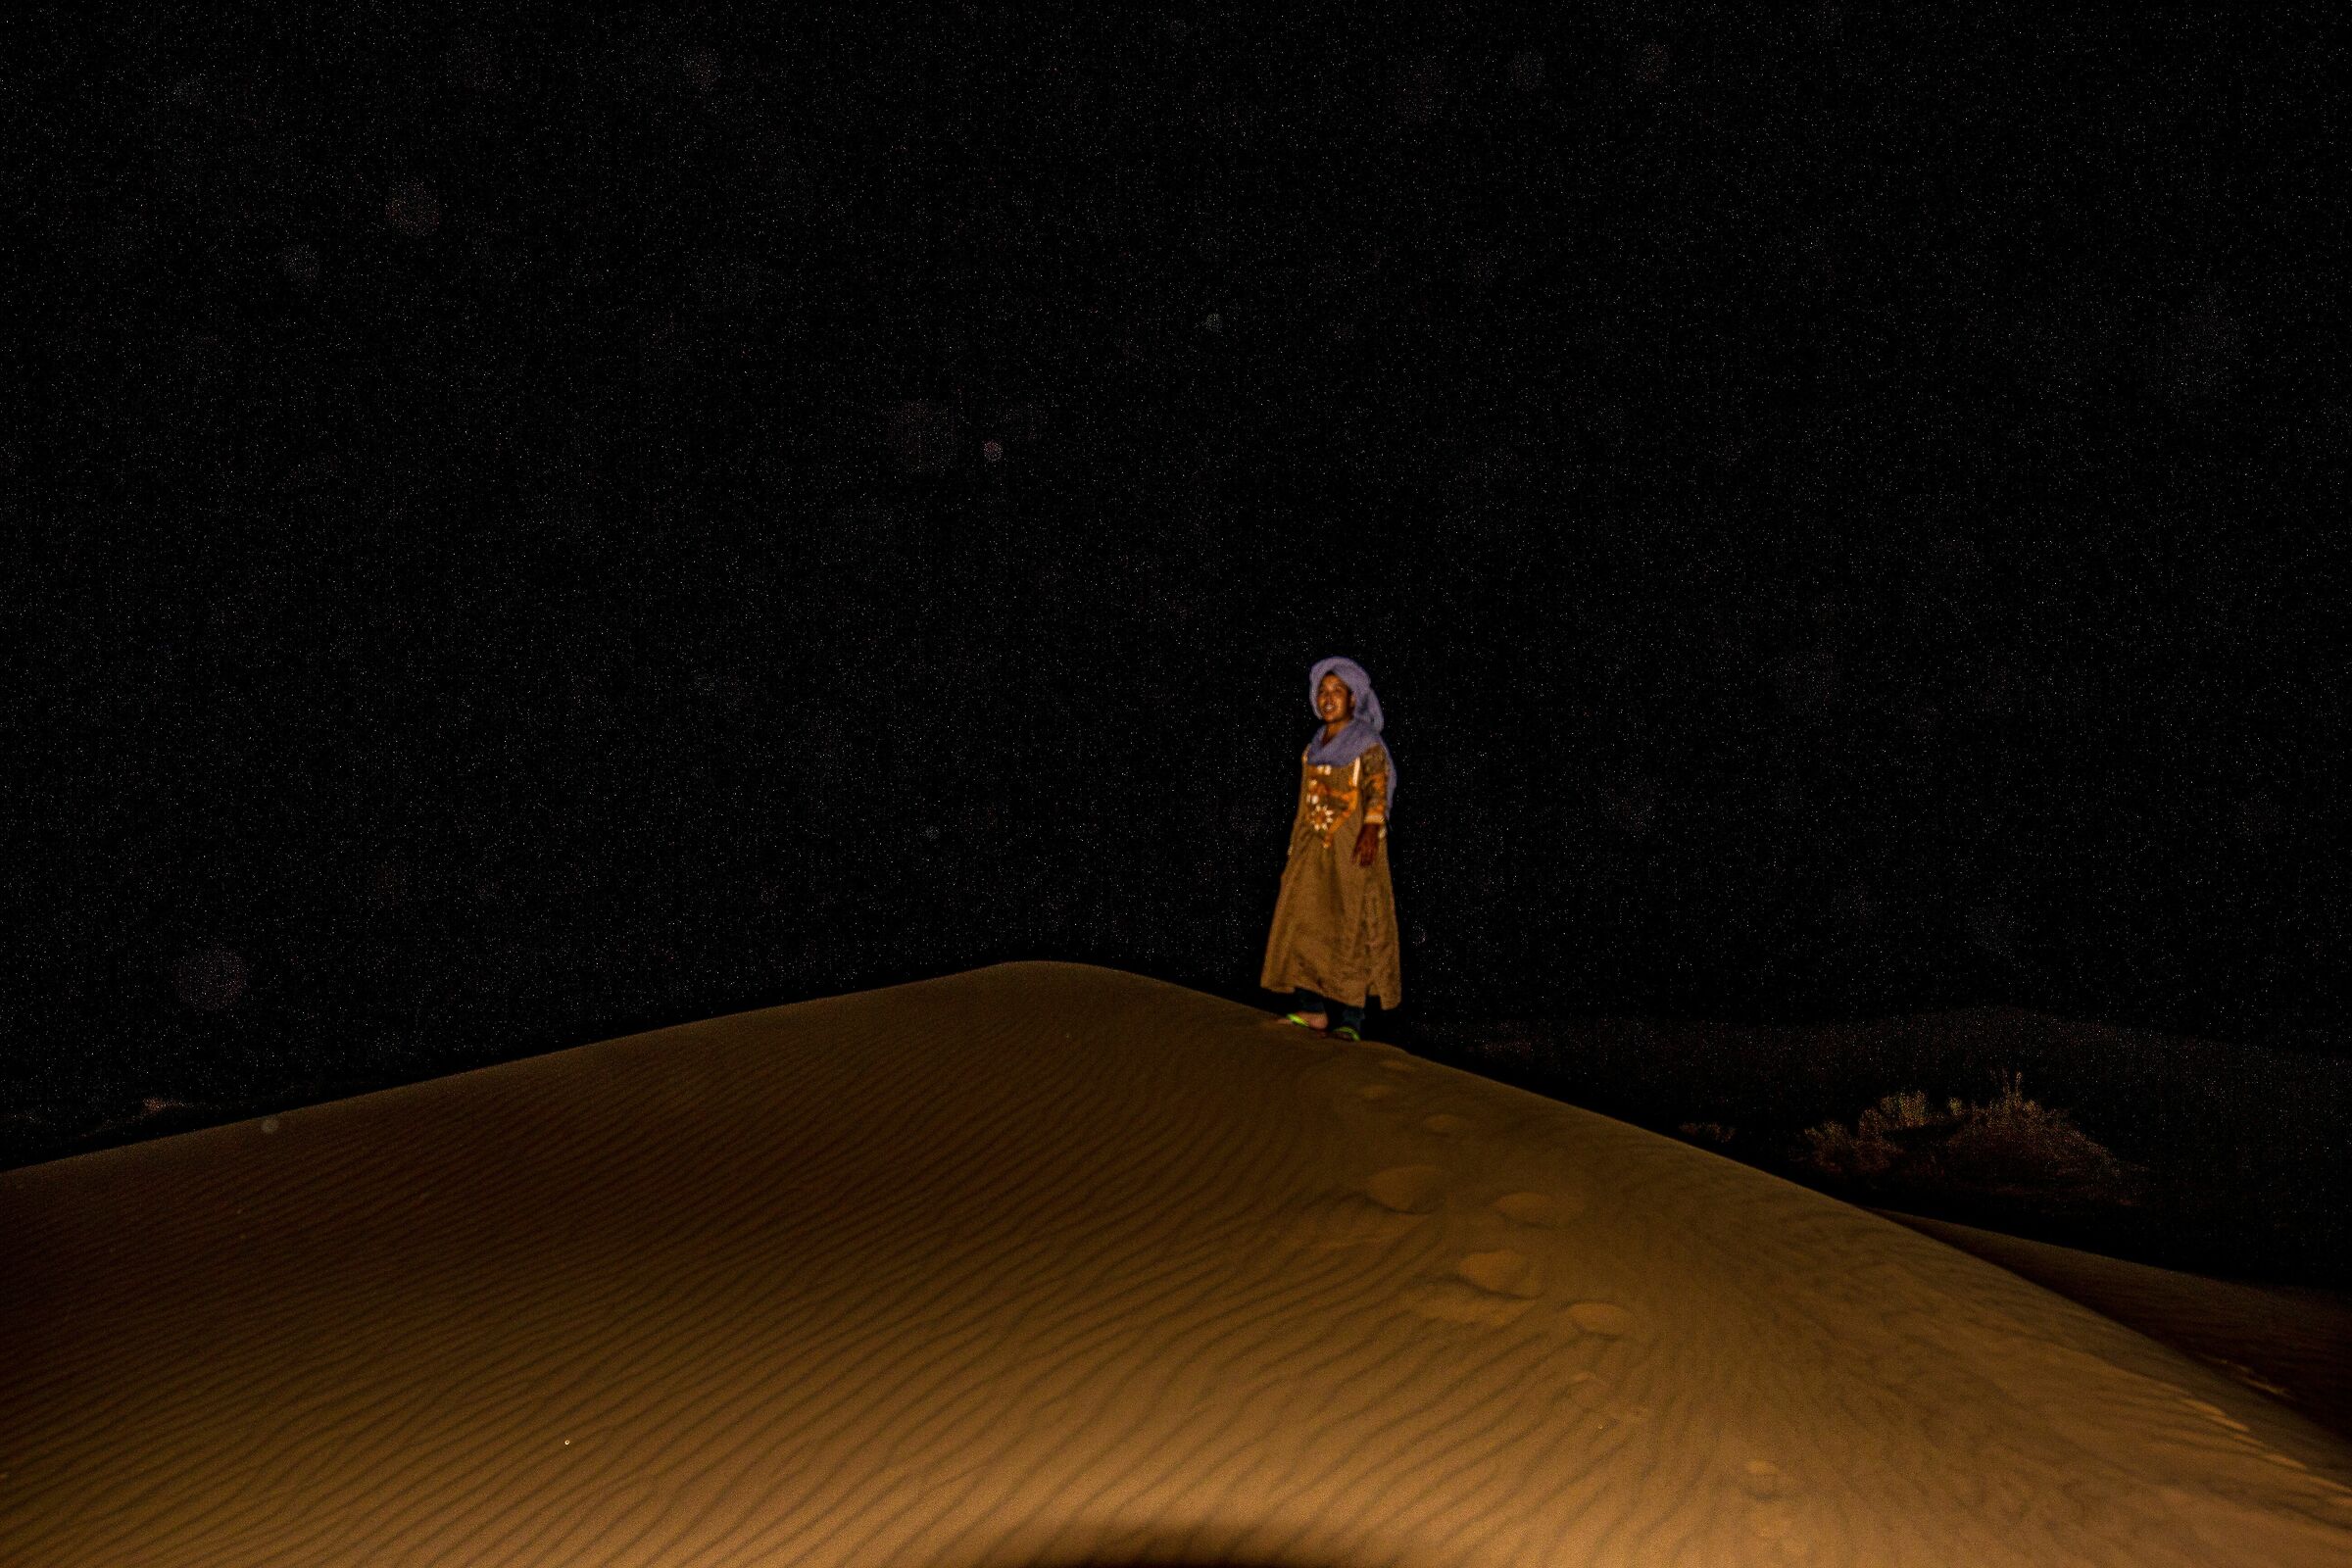 The first night in the desert...